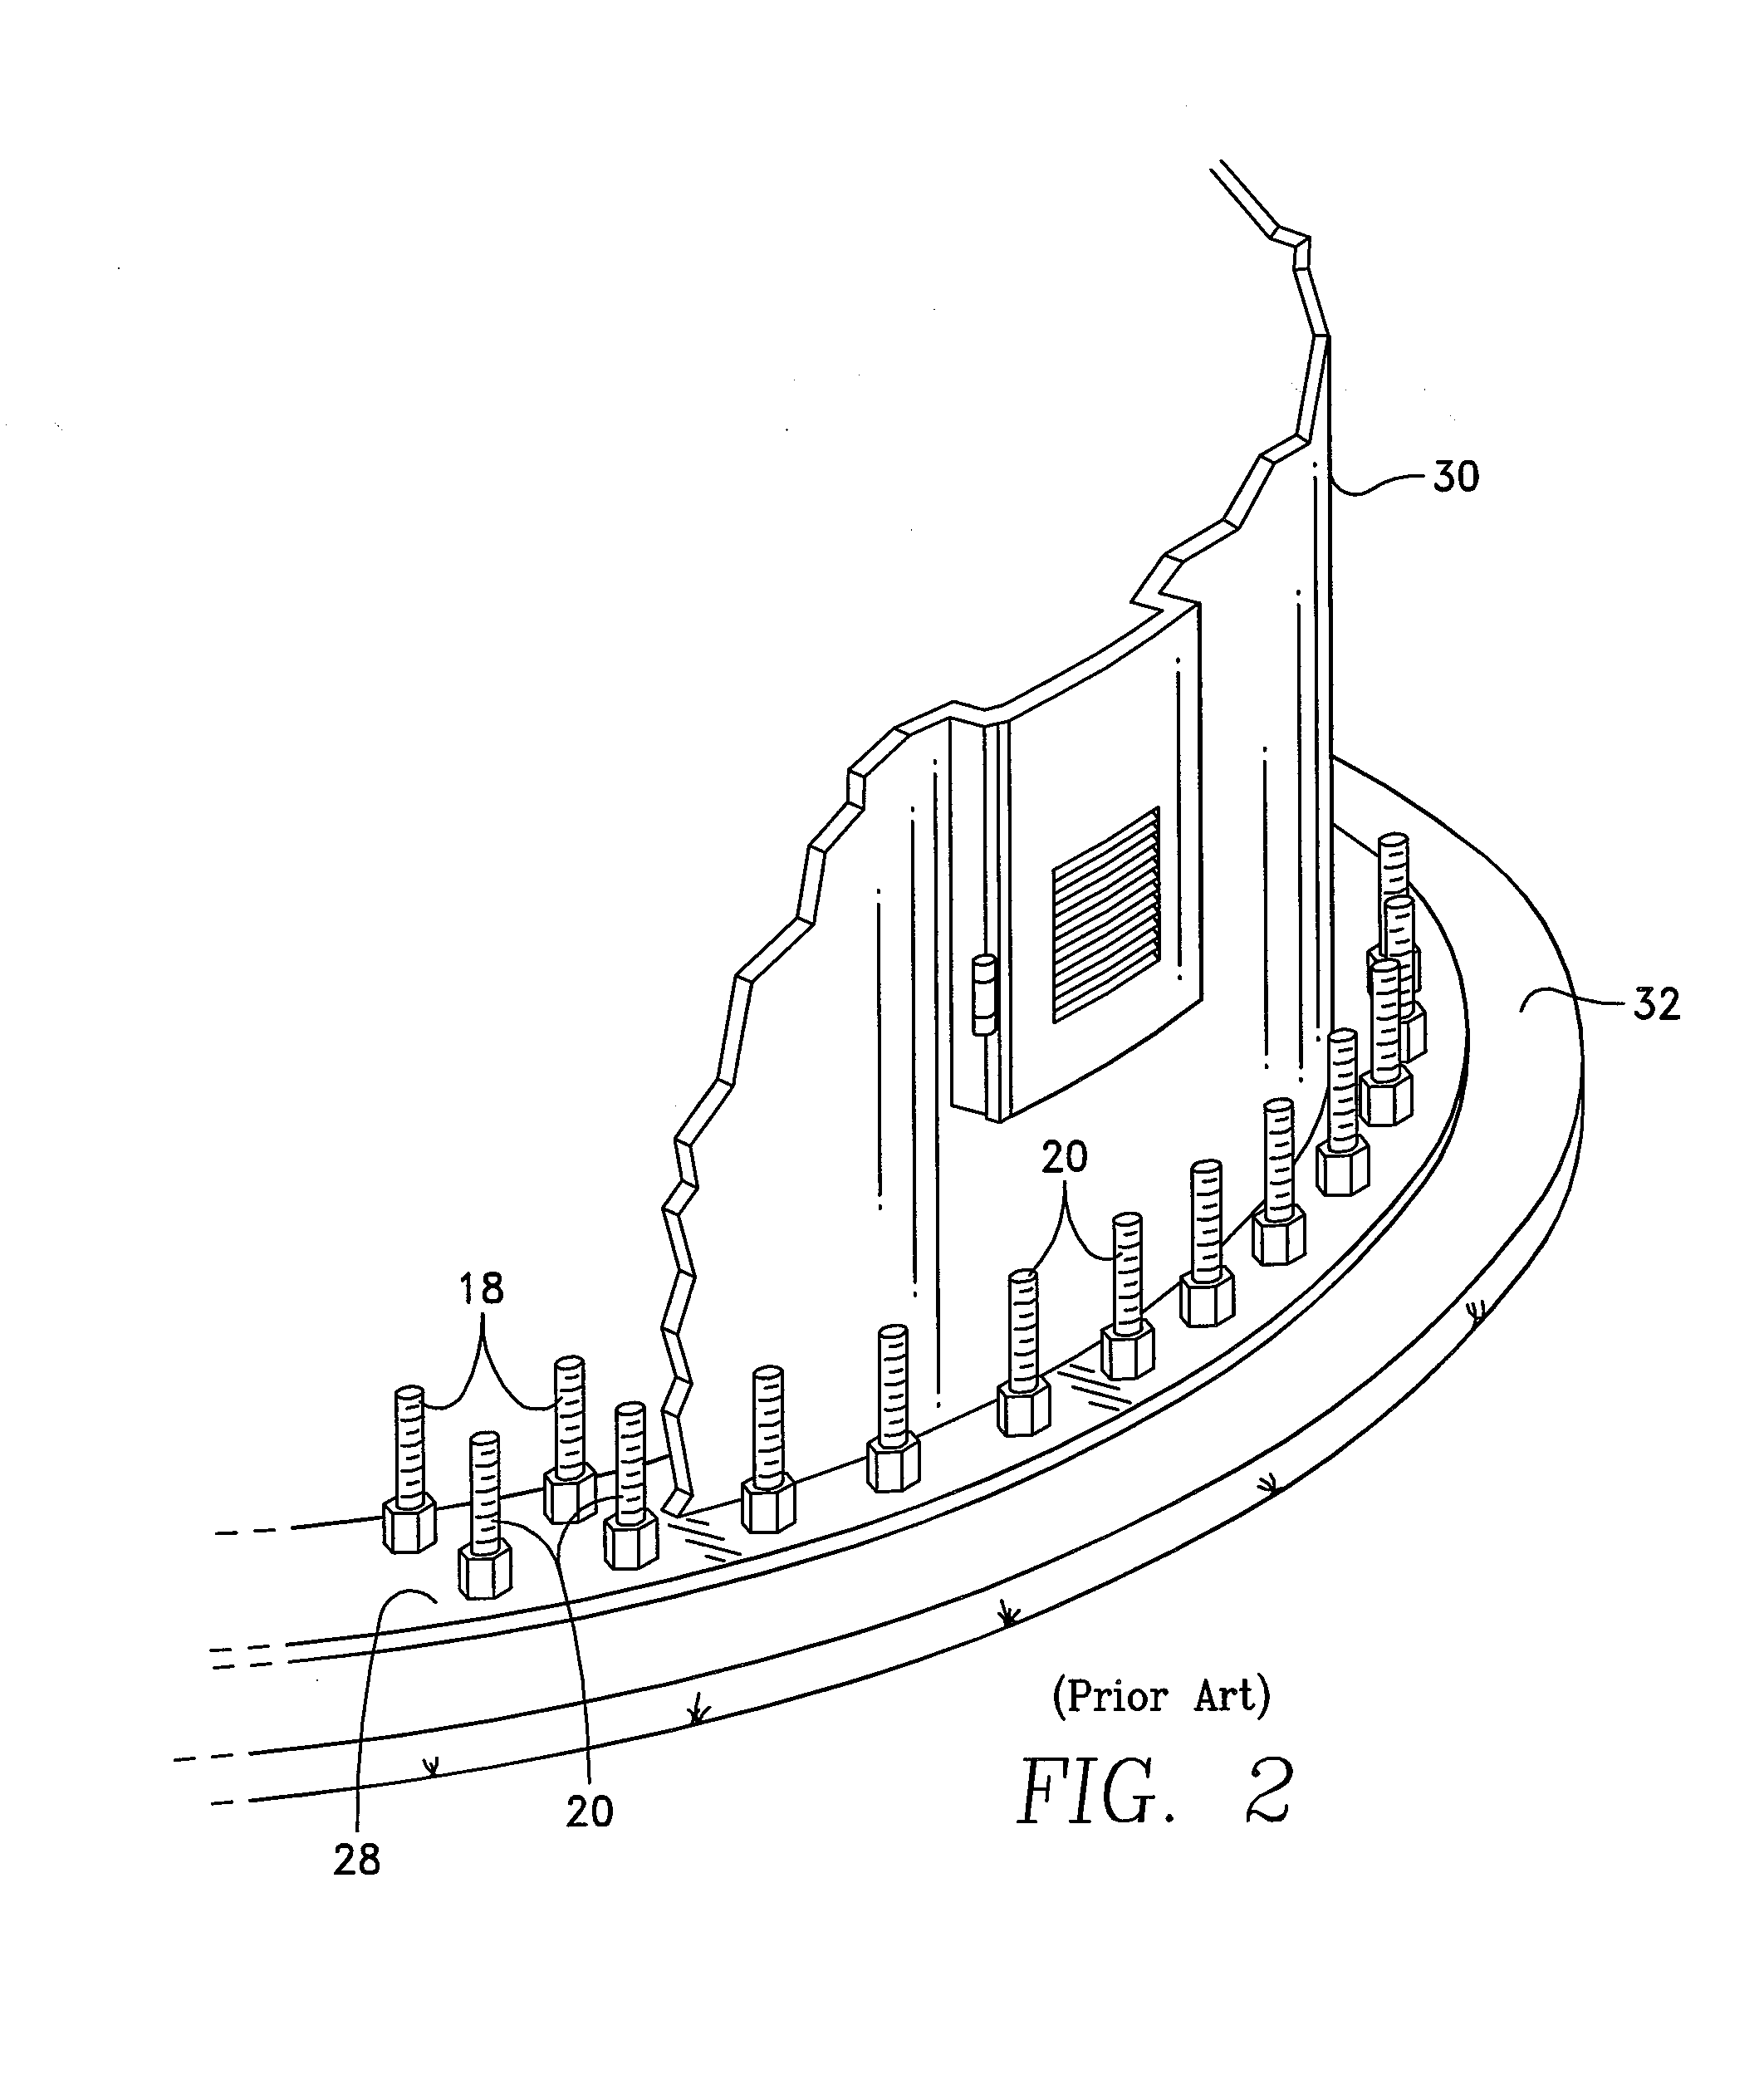 Apparatus and method for installing anchor bolts in a cylindrical pier foundation